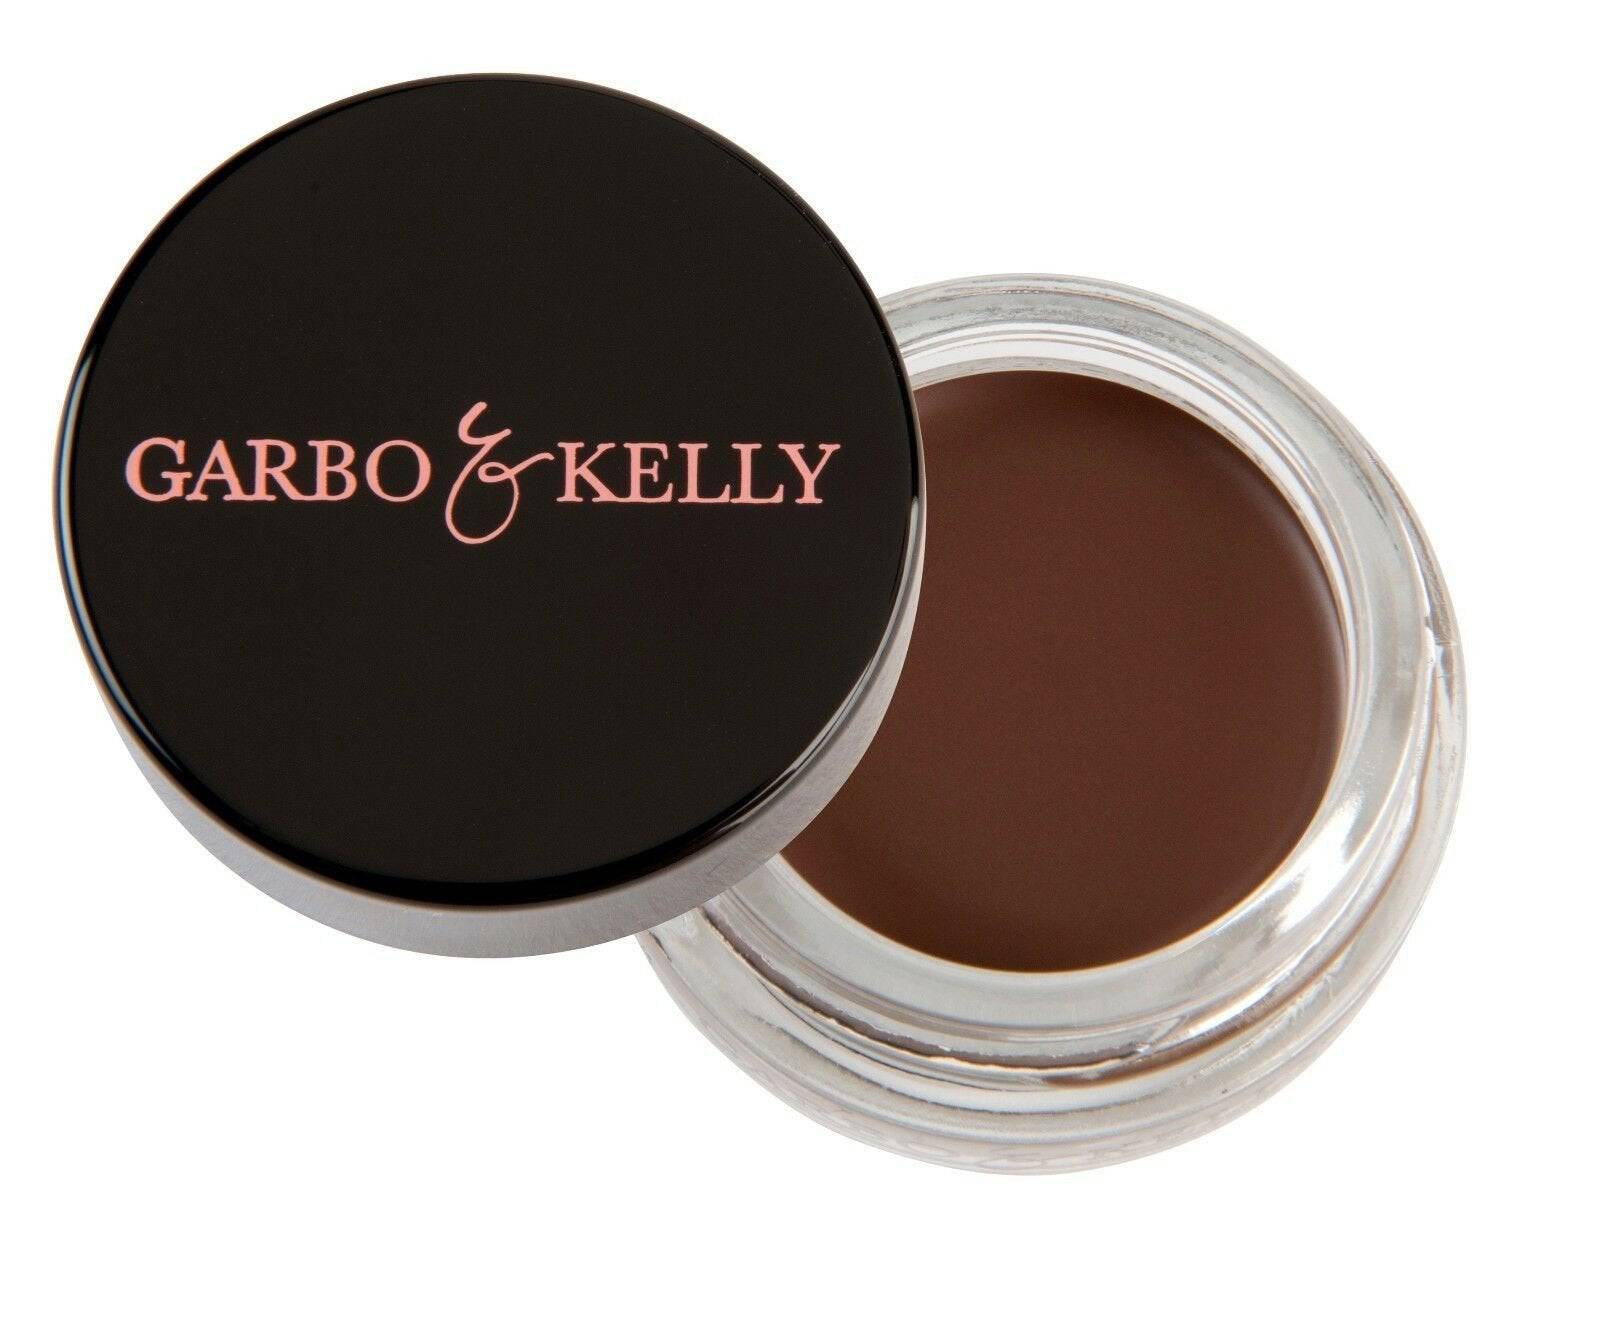 Garbo & Kelly Cocoa - Pomade x 1 Garbo & Kelly - On Line Hair Depot